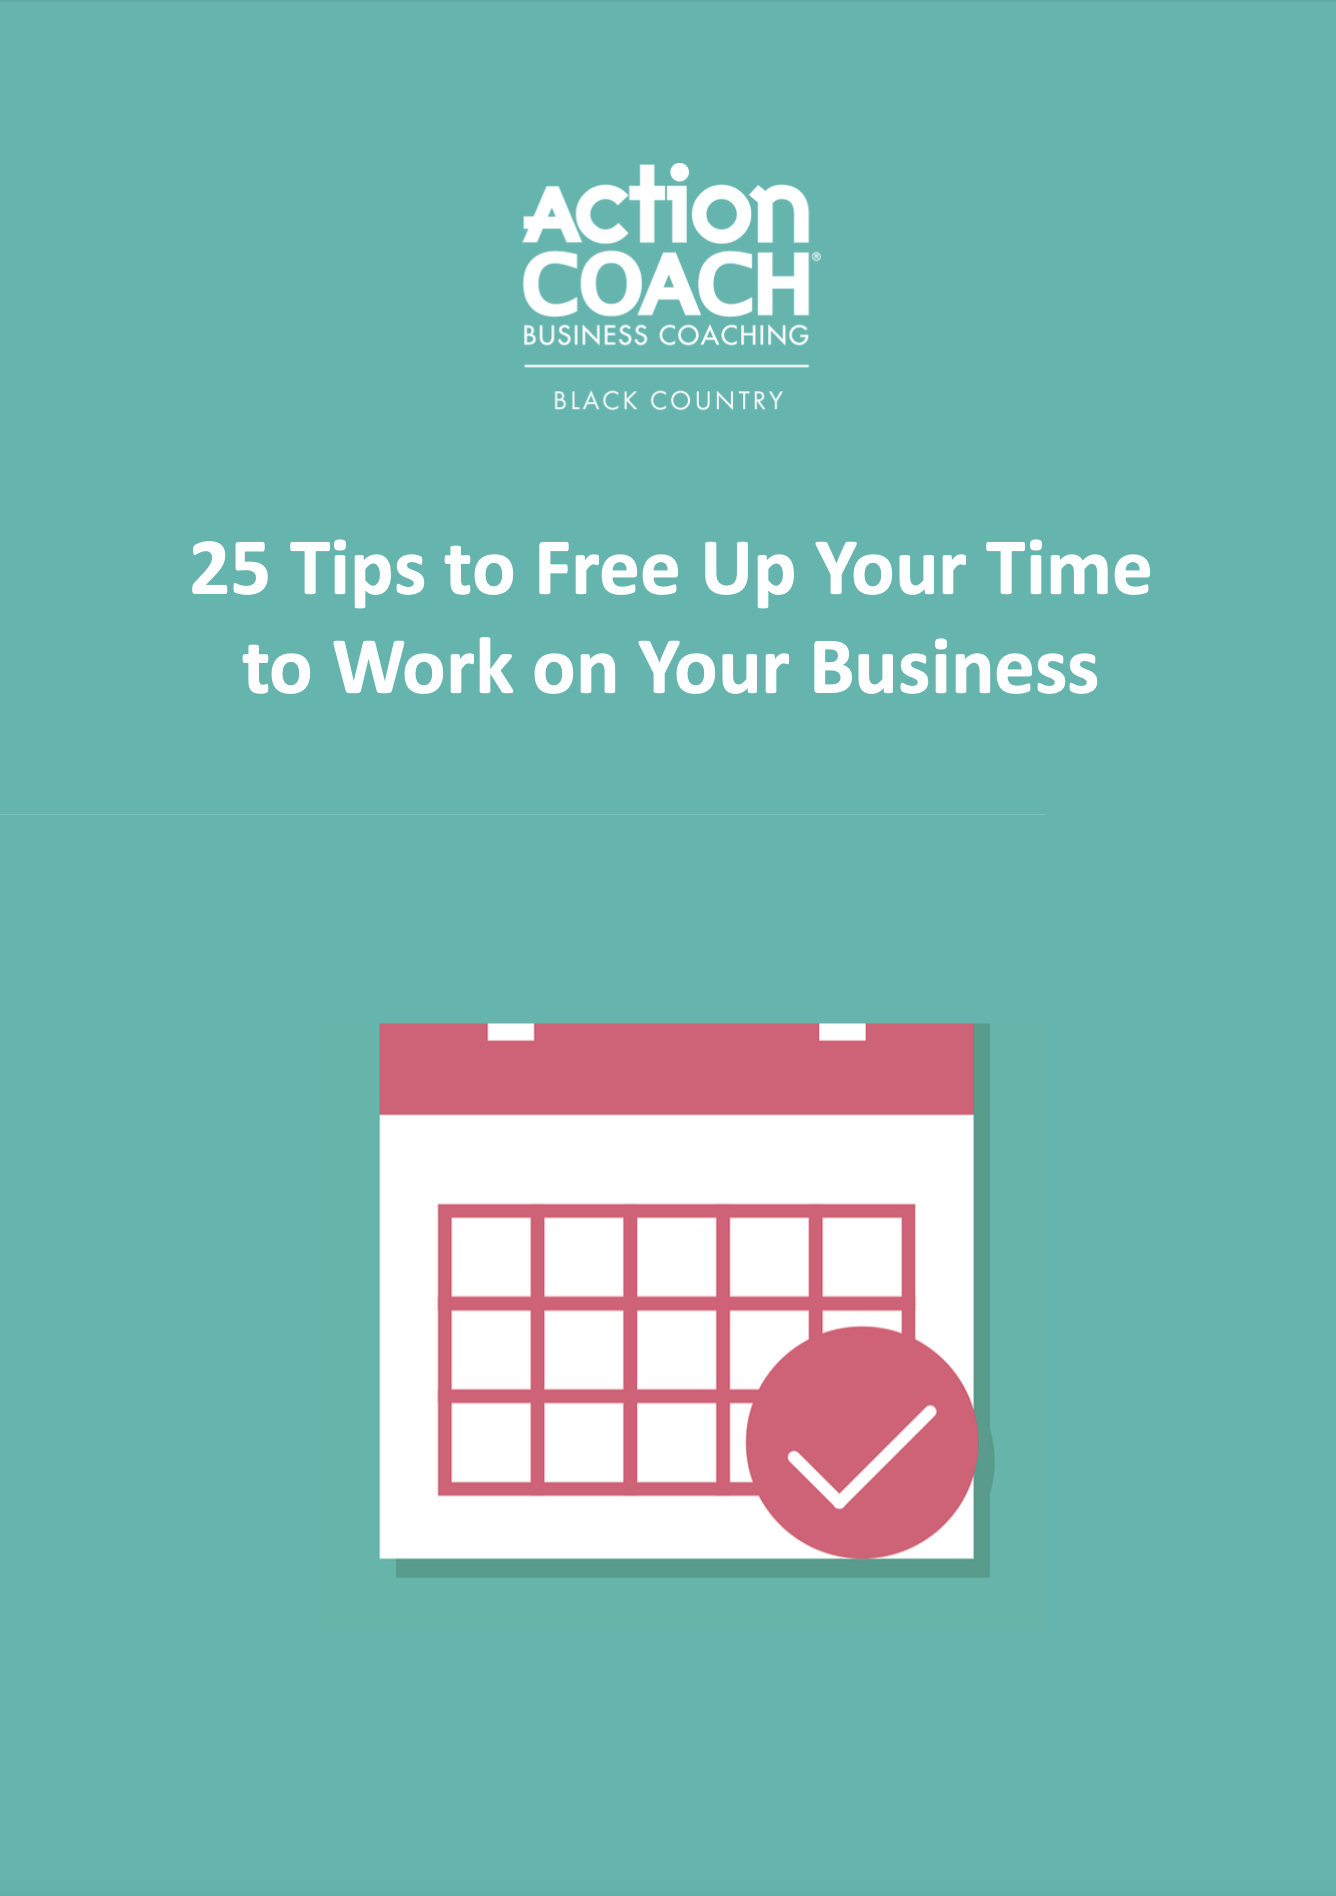 25 Tips to Free Up Your Time to Work on Your Business_COVER